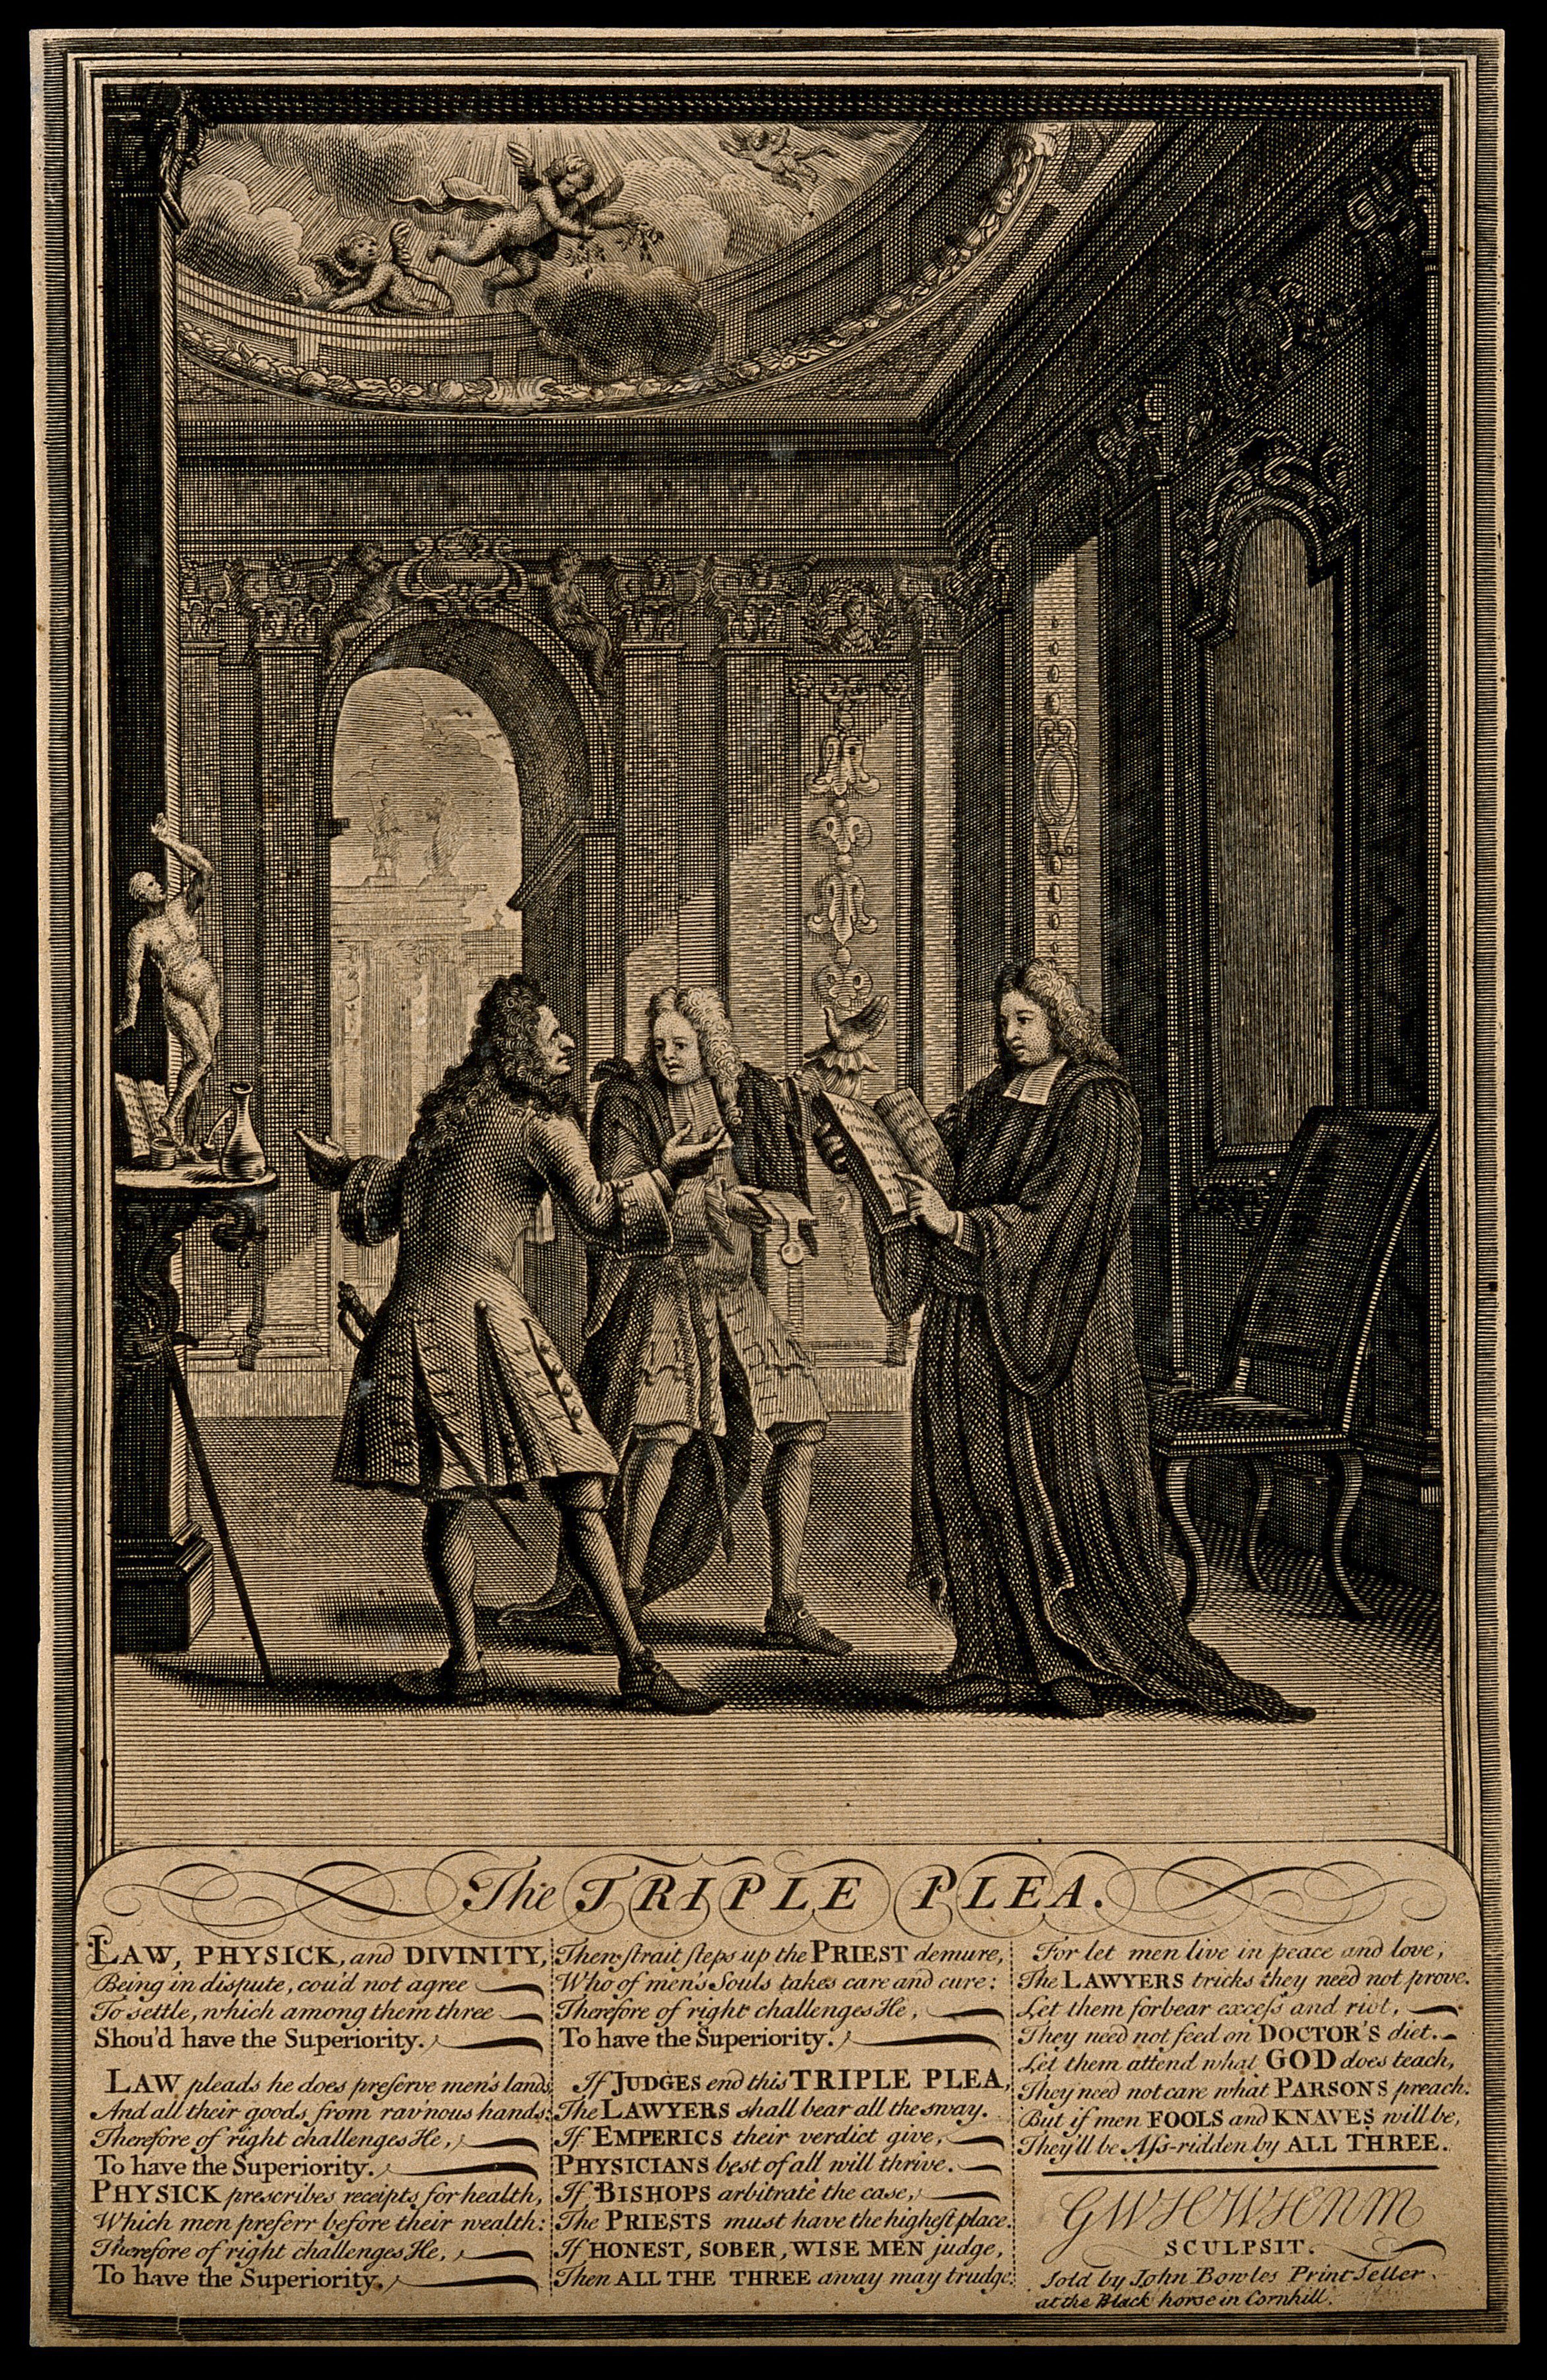 Personifications of law, medicine and theology argue over the superiority of their respective professions. Engraving by GWHWHNM, ca. 1720.